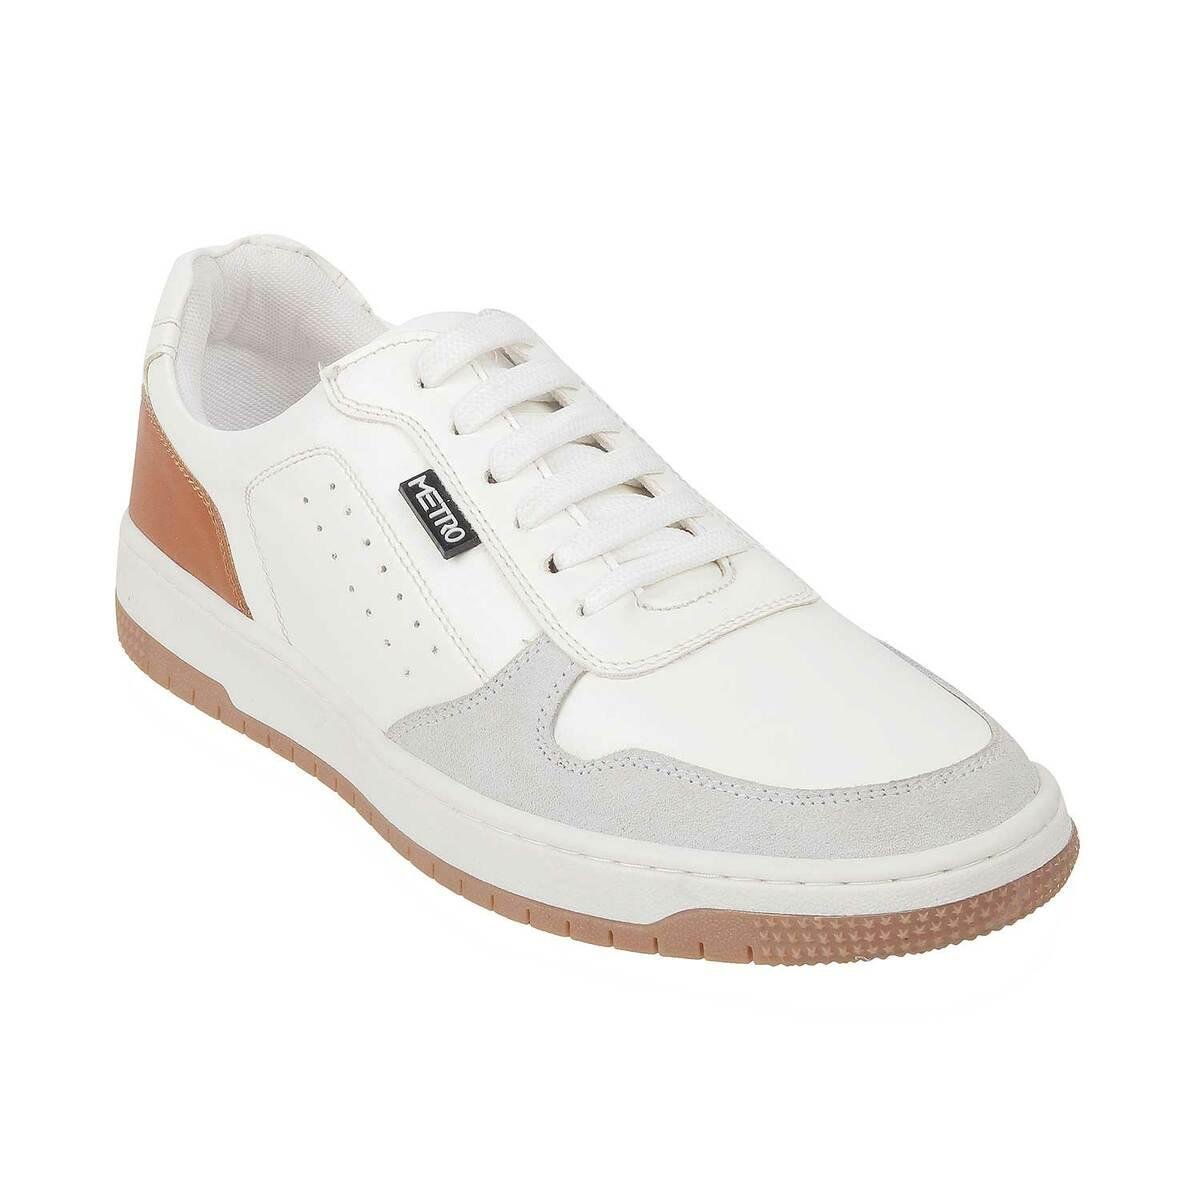 Buy Kraasa ReviveRetro White Sneakers for Men|Casual Shoes for Men|Streetwear  Fashion Sneakers for Men Whitee1 UK 6 at Amazon.in